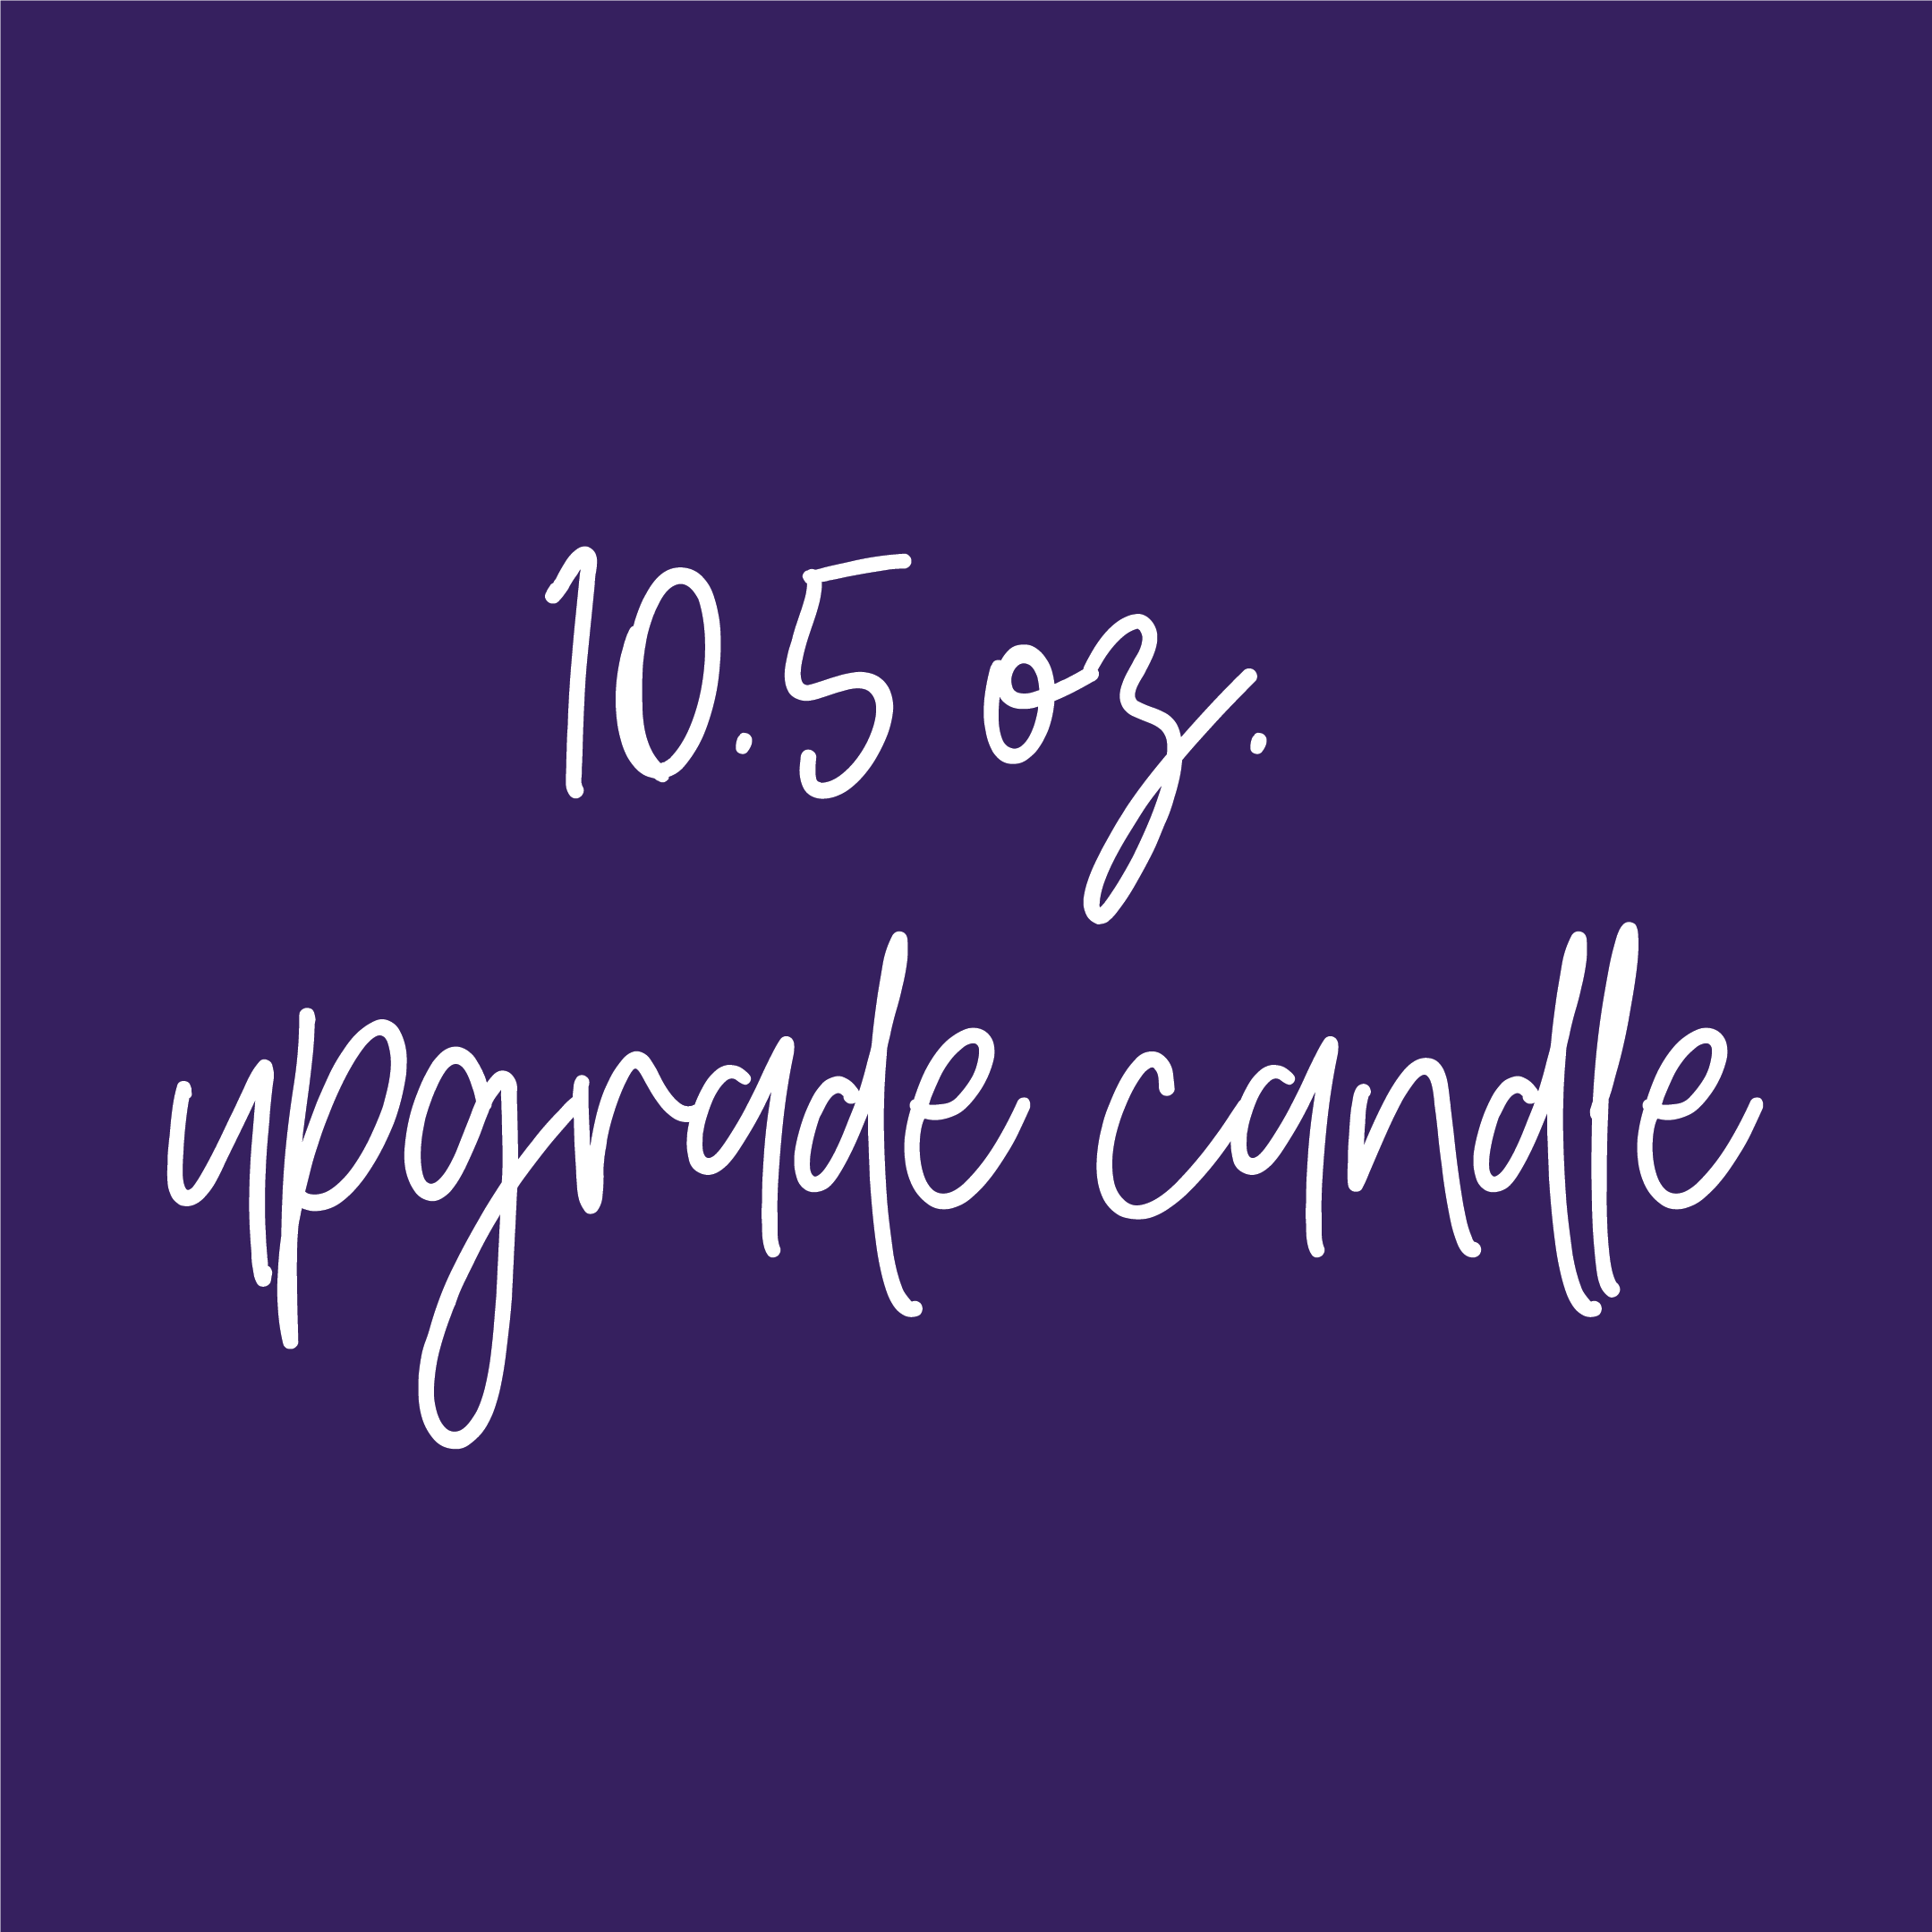 Re-order 10.5 oz. upgrade candle